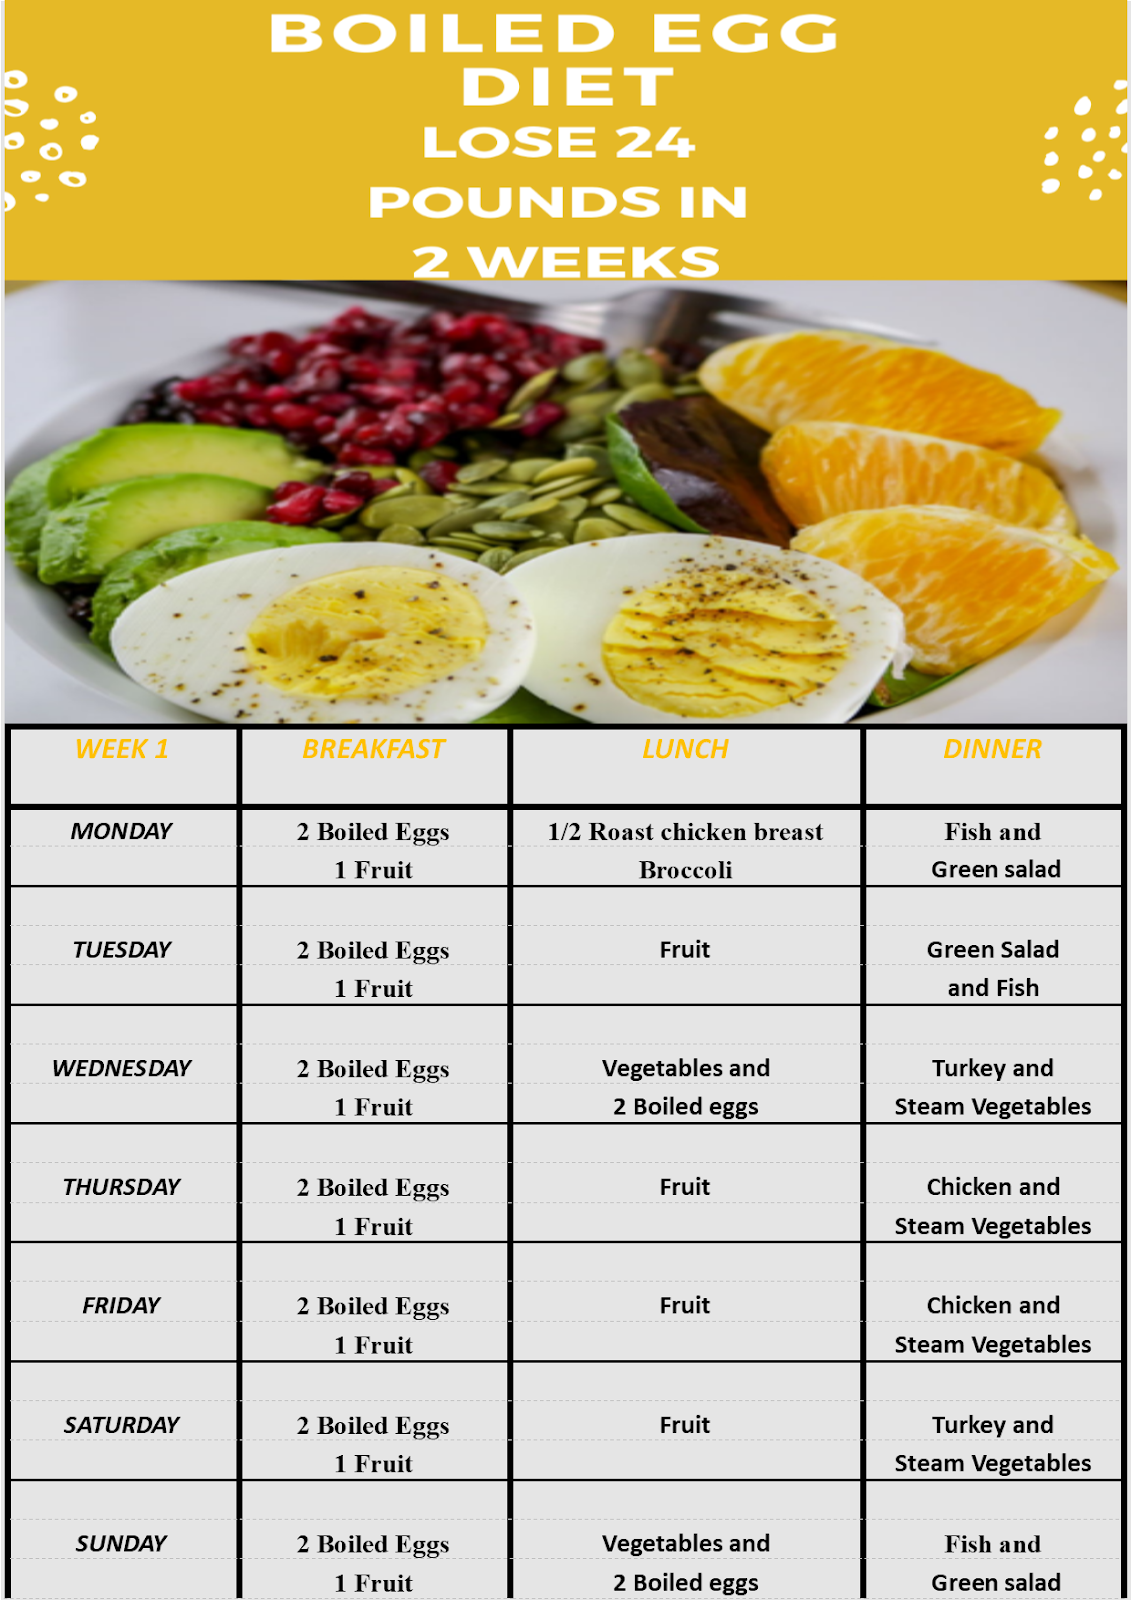 boiled-egg-diet-plan-what-is-a-financial-plan